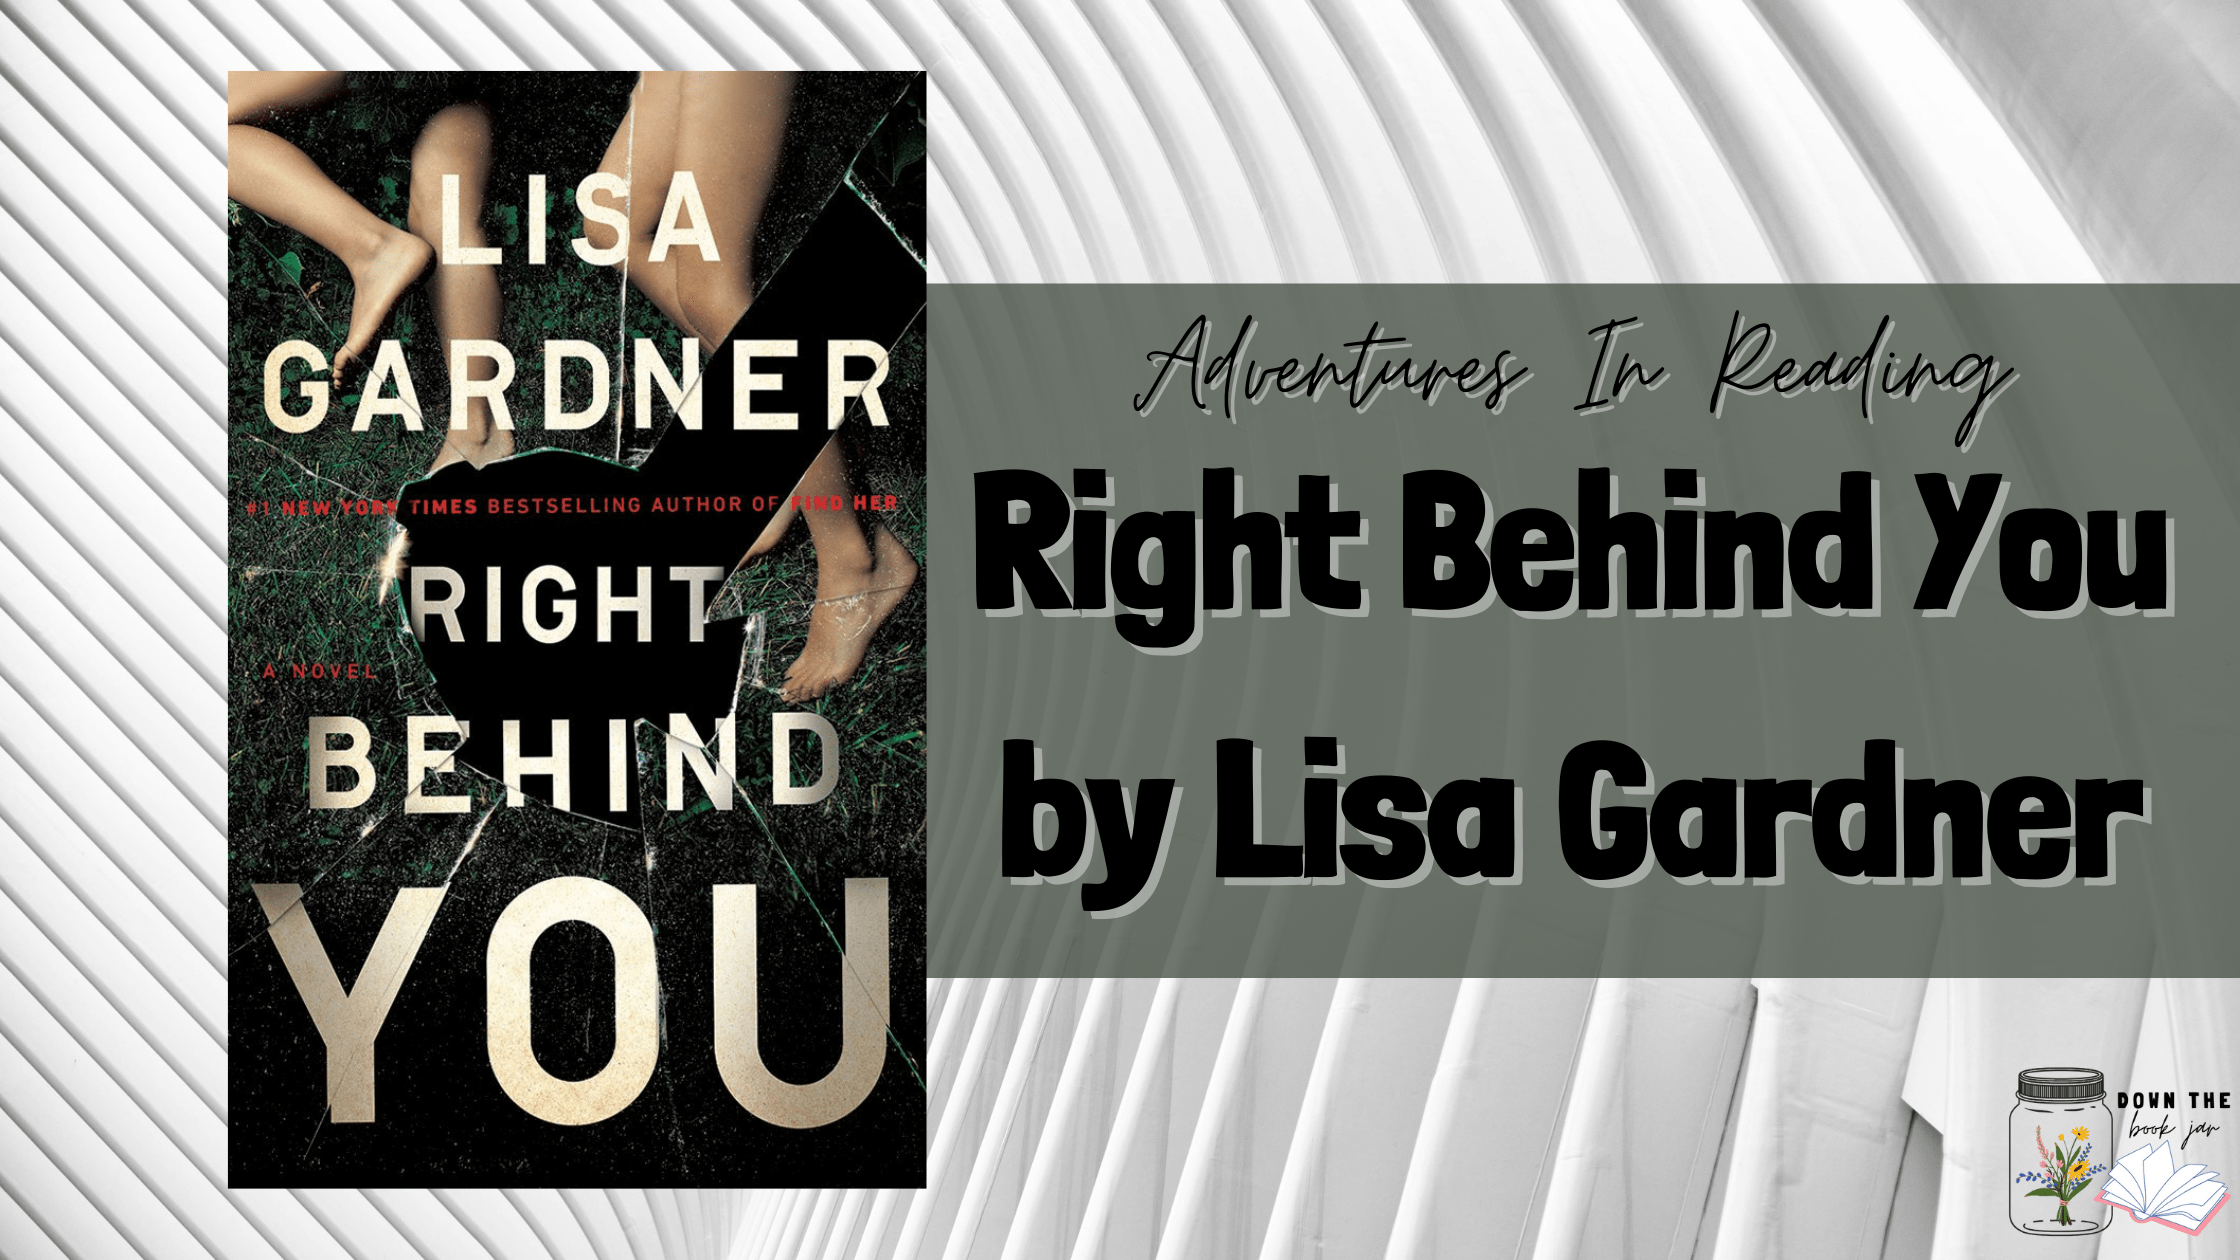 Right Behind You by Lisa Gardner